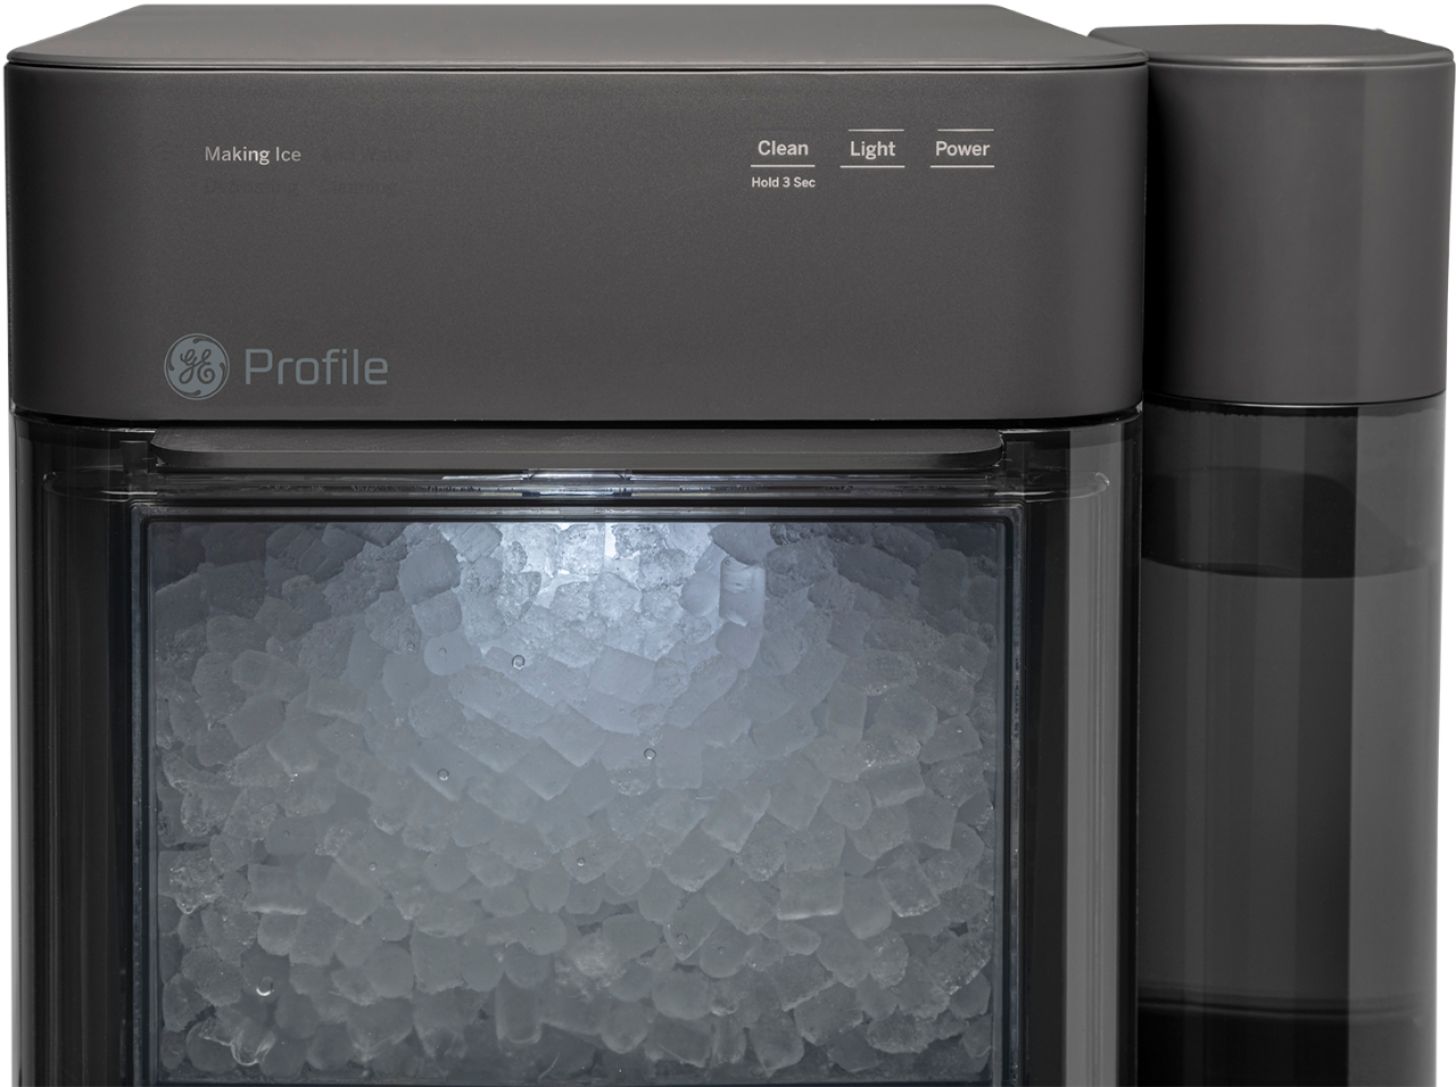 TikTok Made Me Buy It: The GE Profile Opal Ice Machine—Here's Why It's  Trending